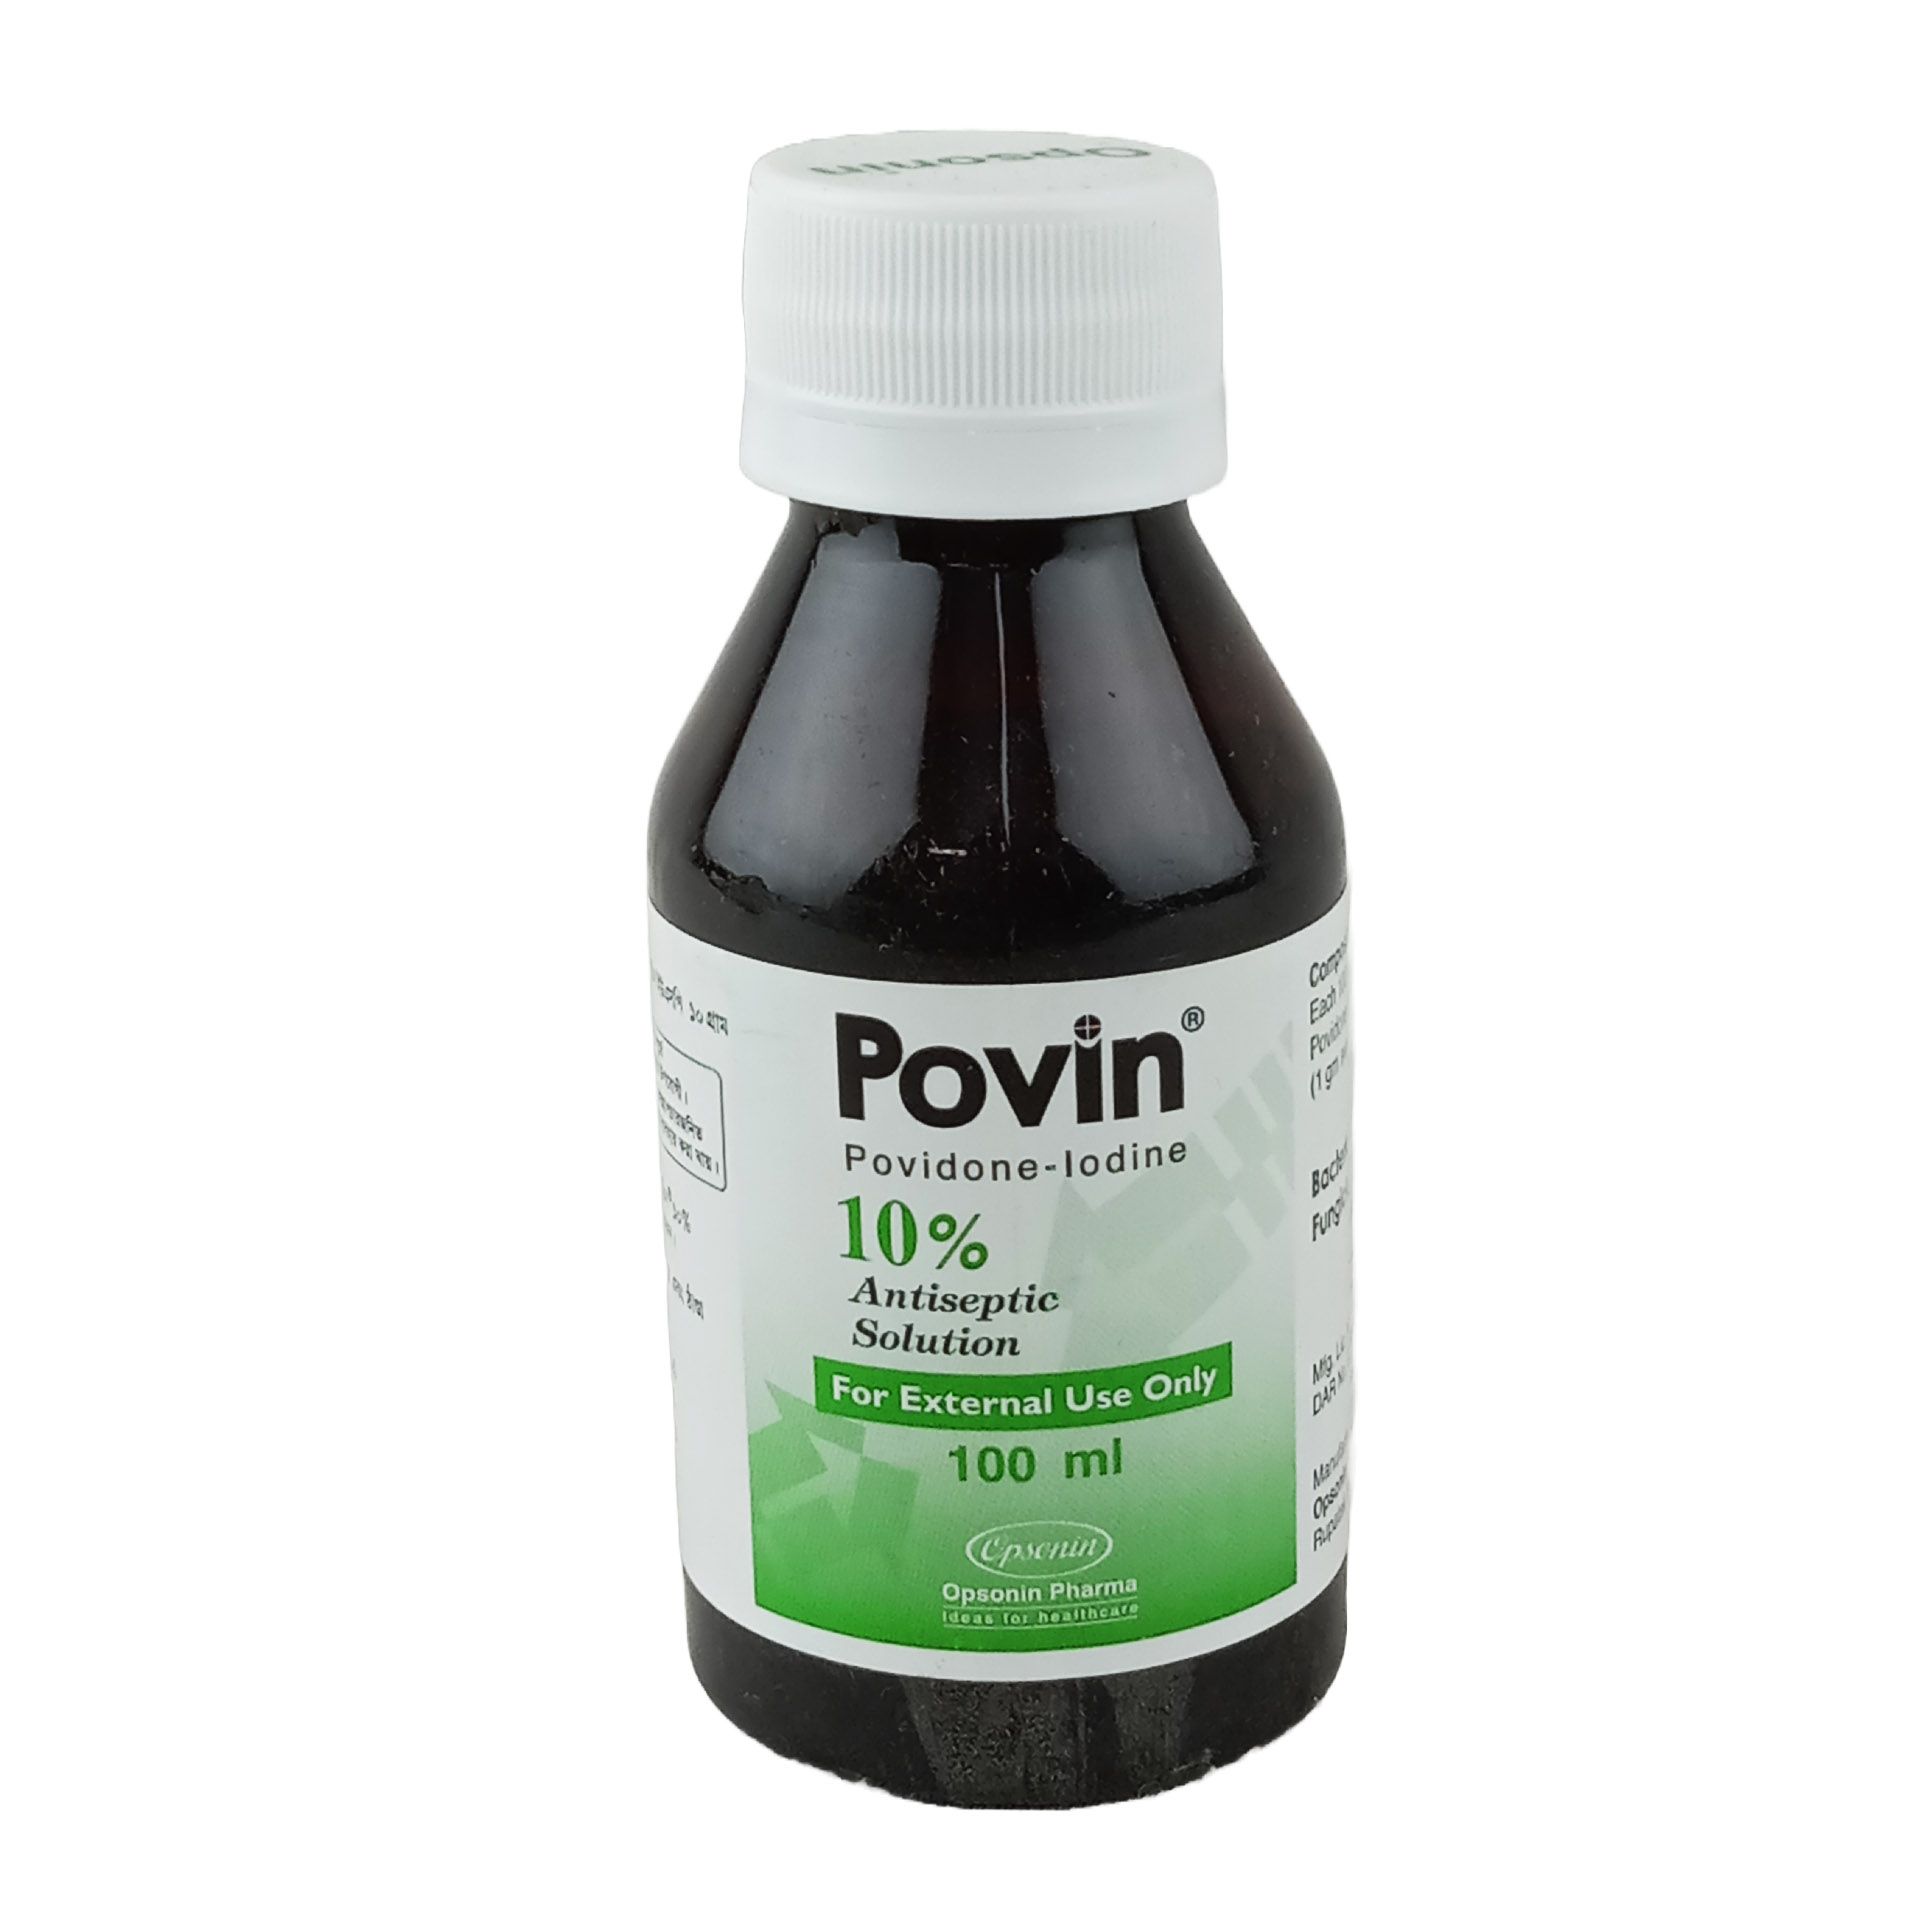 Povin 10% Topical Solution